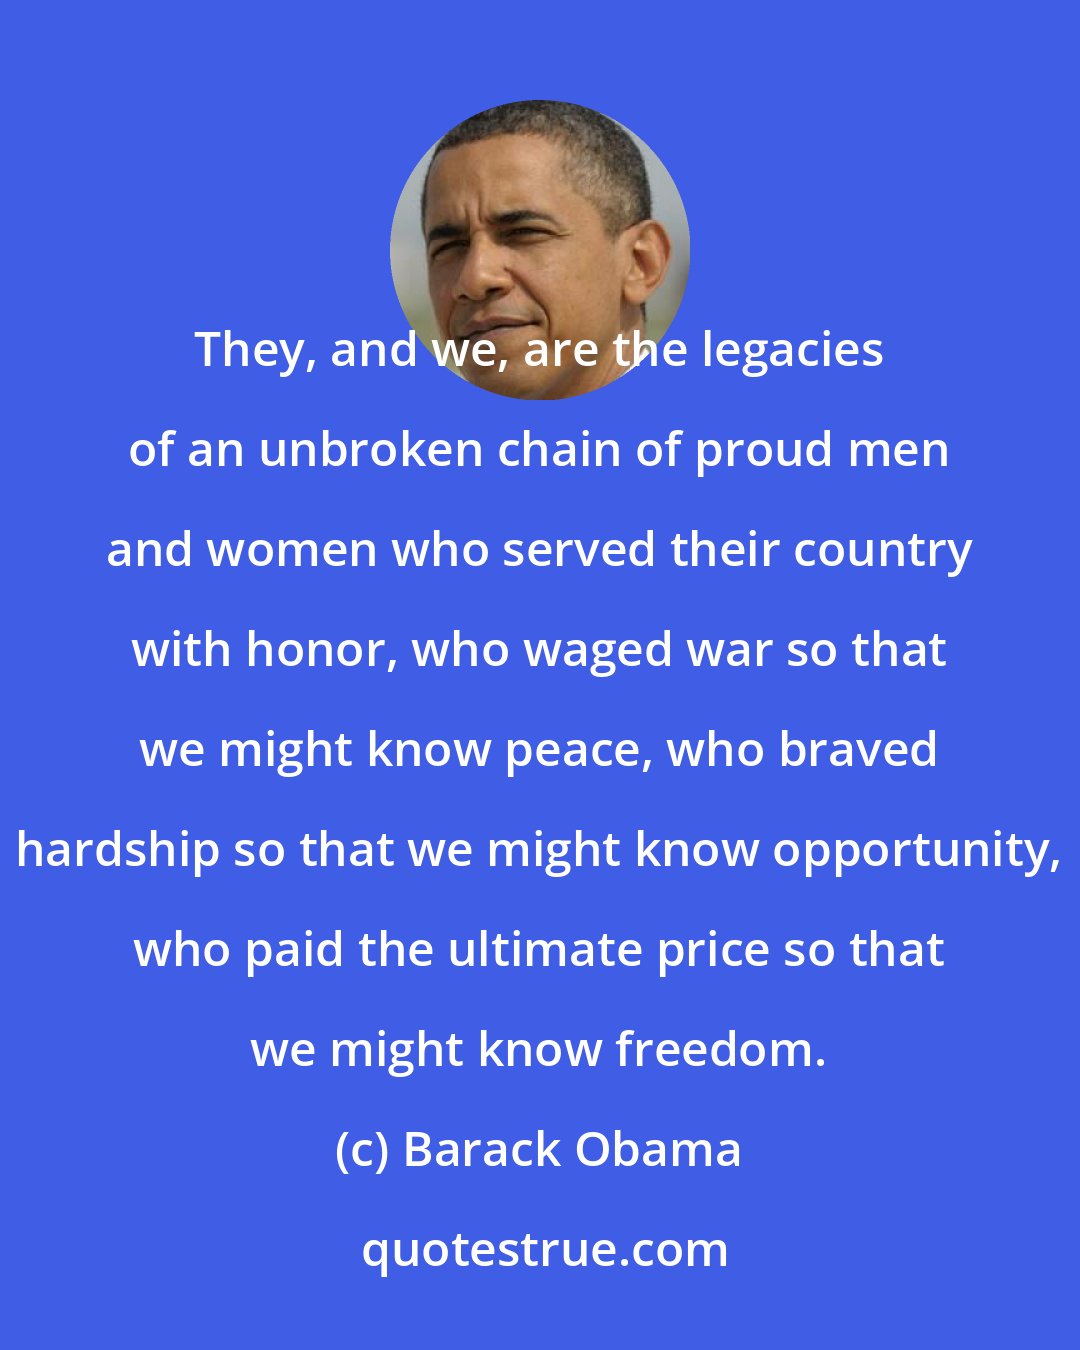 Barack Obama: They, and we, are the legacies of an unbroken chain of proud men and women who served their country with honor, who waged war so that we might know peace, who braved hardship so that we might know opportunity, who paid the ultimate price so that we might know freedom.